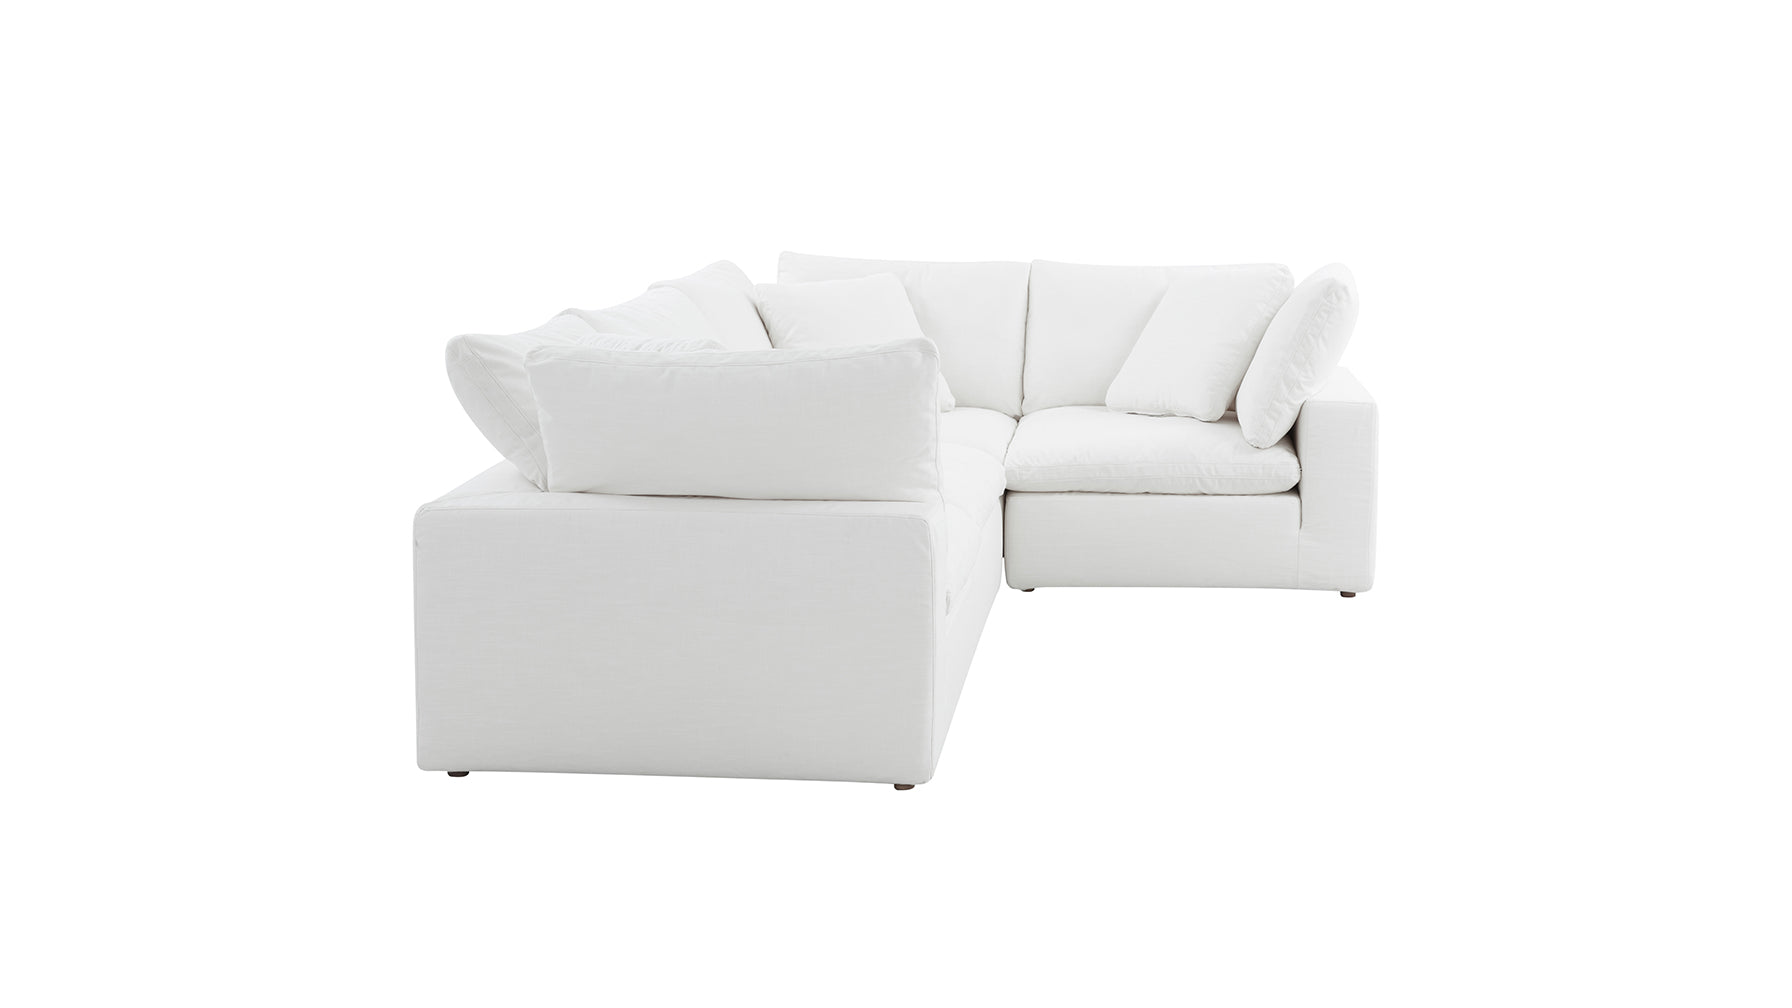 Movie Night™ 4-Piece Modular Sectional Closed, Standard, Brie - Image 7